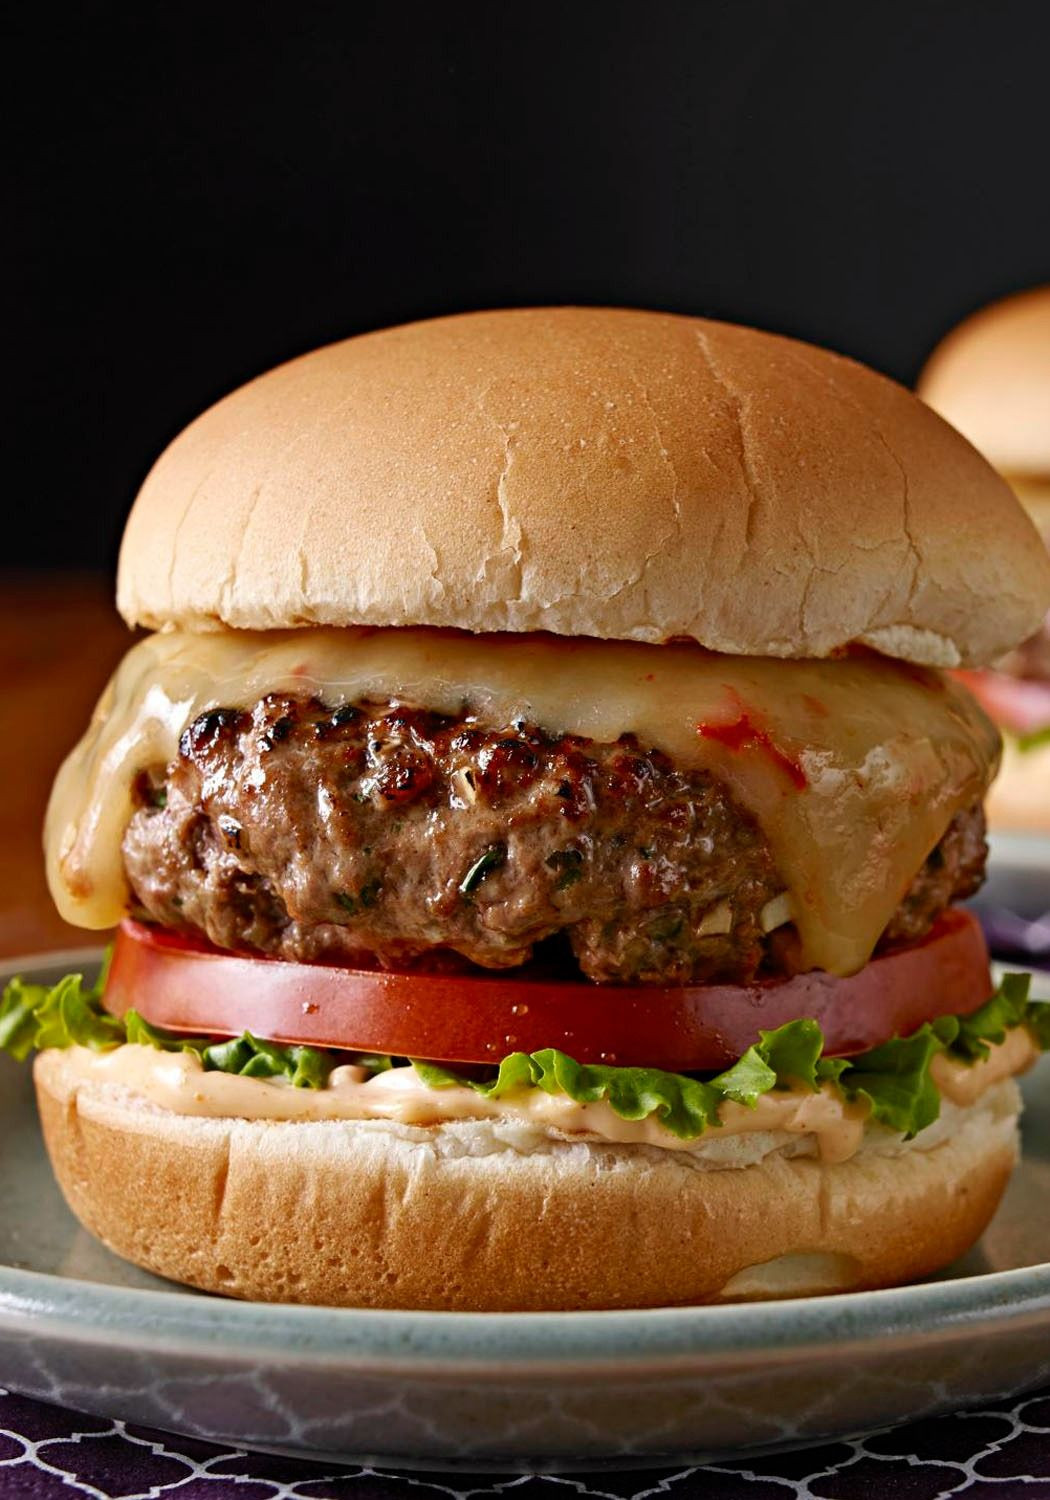 Hamburgers By Gourmet
 Gourmet Chipotle Burgers — Ground beef chipotle peppers